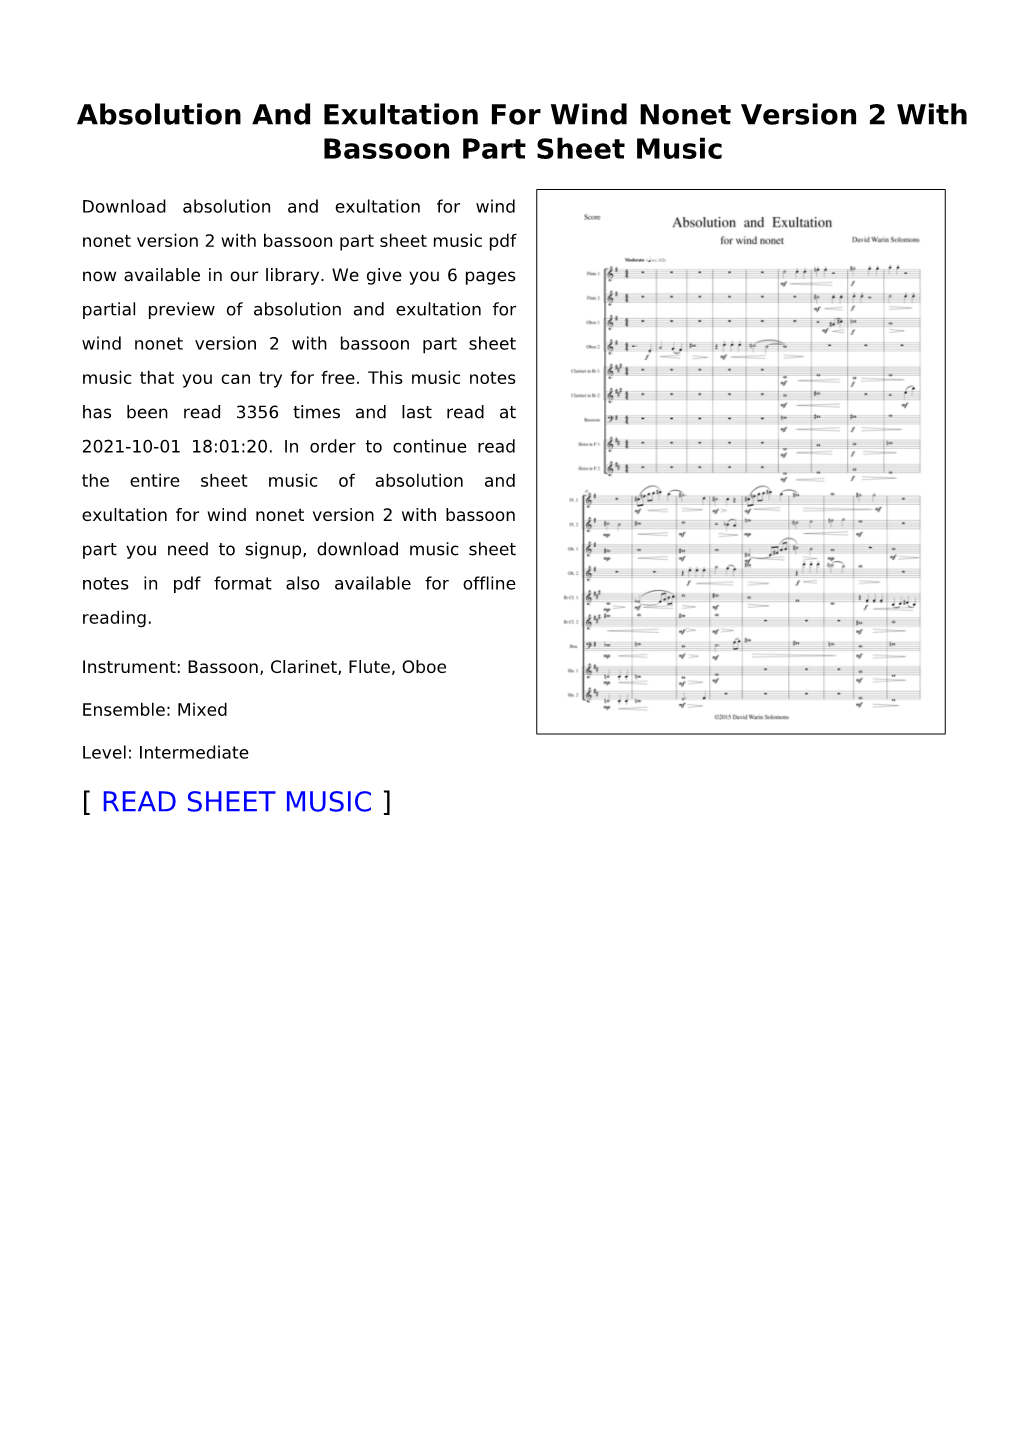 Absolution and Exultation for Wind Nonet Version 2 with Bassoon Part Sheet Music